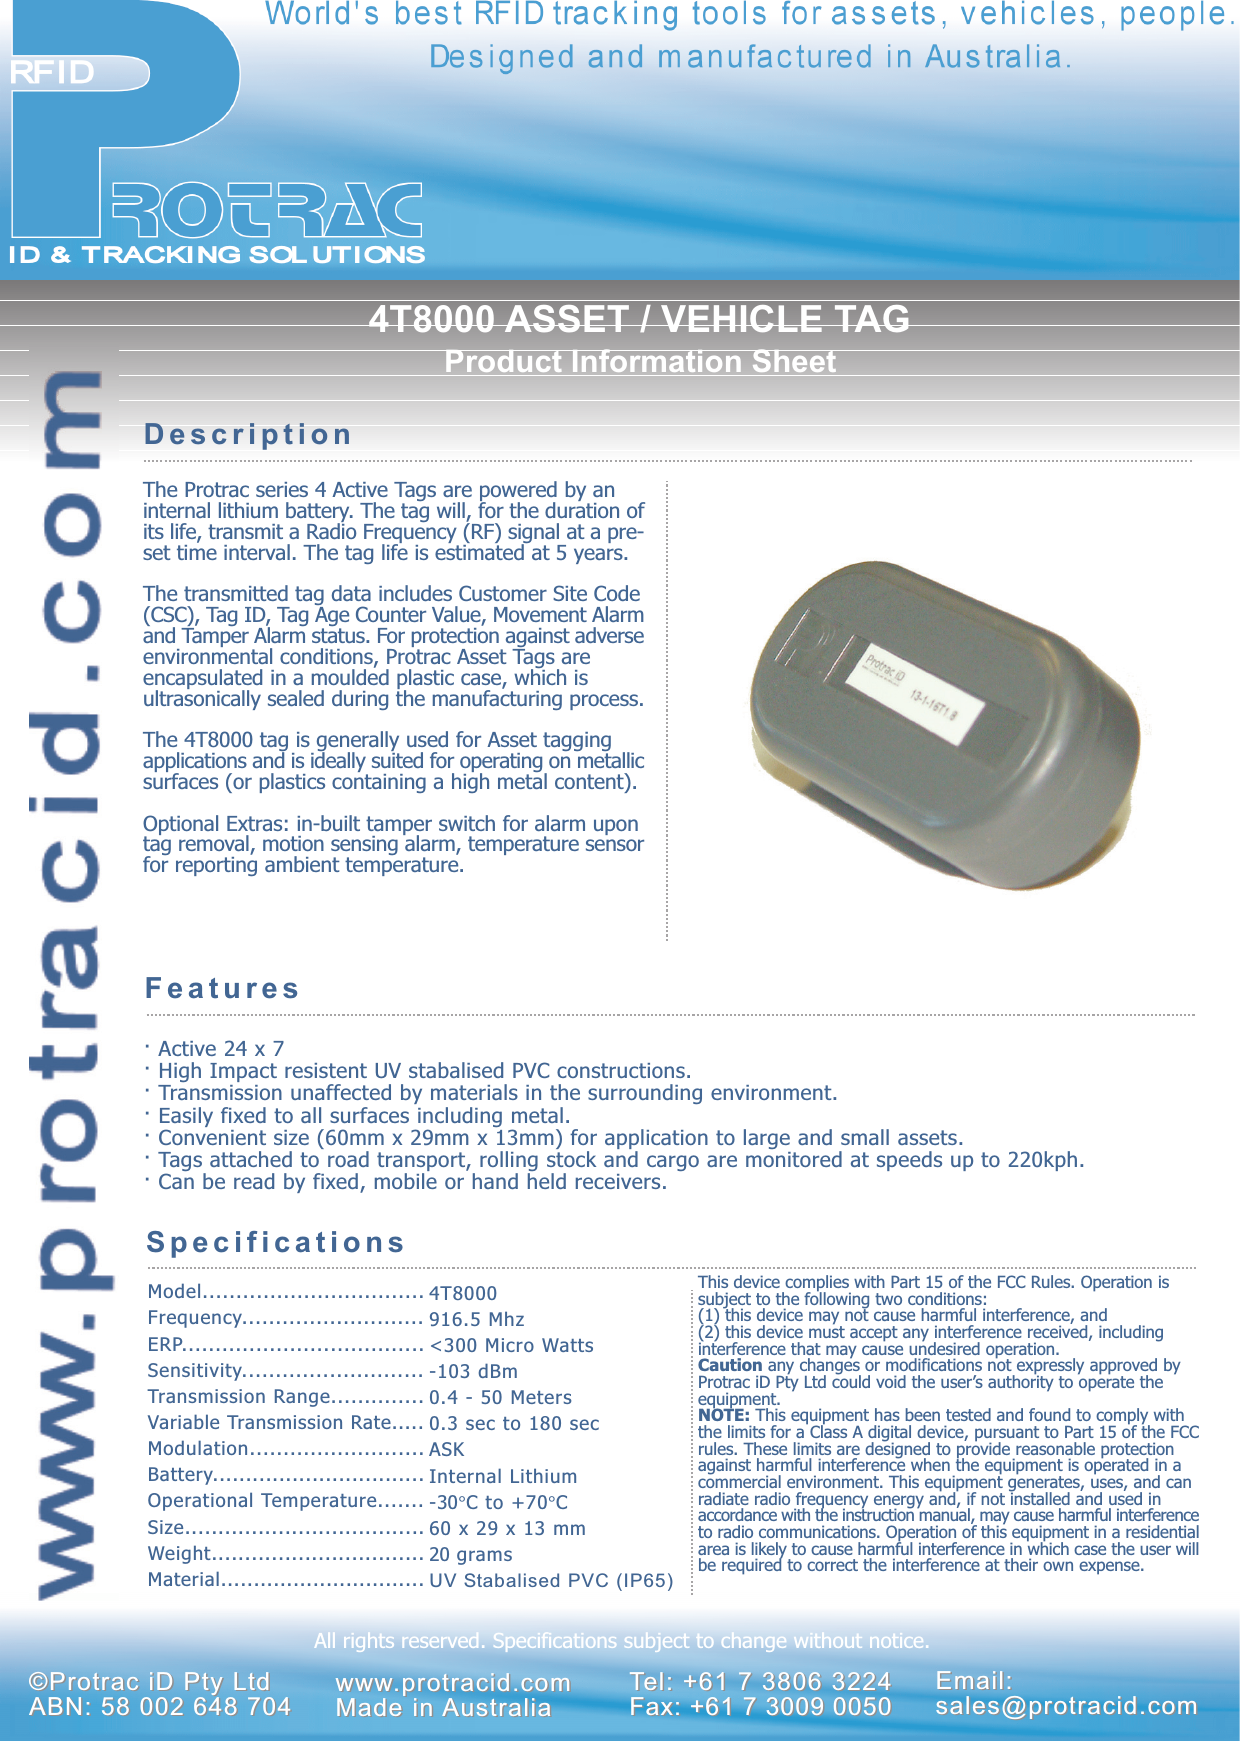 4T8000 ASSET / VEHICLE TAGProduct Information SheetThe Protrac series 4 Active Tags are powered by aninternal lithium battery. The tag will, for the duration ofits life, transmit a Radio Frequency (RF) signal at a pre-set time interval. The tag life is estimated at 5 years.The transmitted tag data includes Customer Site Code(CSC), Tag ID, Tag Age Counter Value, Movement Alarmand Tamper Alarm status. For protection against adverseenvironmental conditions, Protrac Asset Tags areencapsulated in a moulded plastic case, which isultrasonically sealed during the manufacturing process.The 4T8000 tag is generally used for Asset taggingapplications and is ideally suited for operating on metallicsurfaces (or plastics containing a high metal content).Optional Extras: in-built tamper switch for alarm upontag removal, motion sensing alarm, temperature sensorfor reporting ambient temperature.DescriptionFeatures· Active 24 x 7· High Impact resistent UV stabalised PVC constructions.· Transmission unaffected by materials in the surrounding environment.· Easily fixed to all surfaces including metal.· Convenient size (60mm x 29mm x 13mm) for application to large and small assets.· Tags attached to road transport, rolling stock and cargo are monitored at speeds up to 220kph.· Can be read by fixed, mobile or hand held receivers.SpecificationsModel.................................Frequency...........................ERP....................................Sensitivity...........................Transmission Range..............Variable Transmission Rate.....Modulation..........................Battery................................Operational Temperature.......Size....................................Weight................................Material...............................4T8000916.5 Mhz&lt;300 Micro Watts-103 dBm0.4 - 50 Meters0.3 sec to 180 secASKInternal Lithium-30°C to +70°C60 x 29 x 13 mm20 gramsUV Stabalised PVC (IP65)All rights reserved. Specifications subject to change without notice.©©Protrac iD Pty LtProtrac iD Pty LtddABN: 58 002 648 704ABN: 58 002 648 704 wwwwww.protracid.com.protracid.comMade in Made in AustraliaAustraliaTTel: +61 7 3806 3224el: +61 7 3806 3224Fax: +61 7 3009 0050Fax: +61 7 3009 0050Email:Email:sales@protracid.comsales@protracid.comThis device complies with Part 15 of the FCC Rules. Operation issubject to the following two conditions:(1) this device may not cause harmful interference, and(2) this device must accept any interference received, includinginterference that may cause undesired operation.Caution any changes or modifications not expressly approved byProtrac iD Pty Ltd could void the users authority to operate theequipment.NOTE: This equipment has been tested and found to comply withthe limits for a Class A digital device, pursuant to Part 15 of the FCCrules. These limits are designed to provide reasonable protectionagainst harmful interference when the equipment is operated in acommercial environment. This equipment generates, uses, and canradiate radio frequency energy and, if not installed and used inaccordance with the instruction manual, may cause harmful interferenceto radio communications. Operation of this equipment in a residentialarea is likely to cause harmful interference in which case the user willbe required to correct the interference at their own expense.